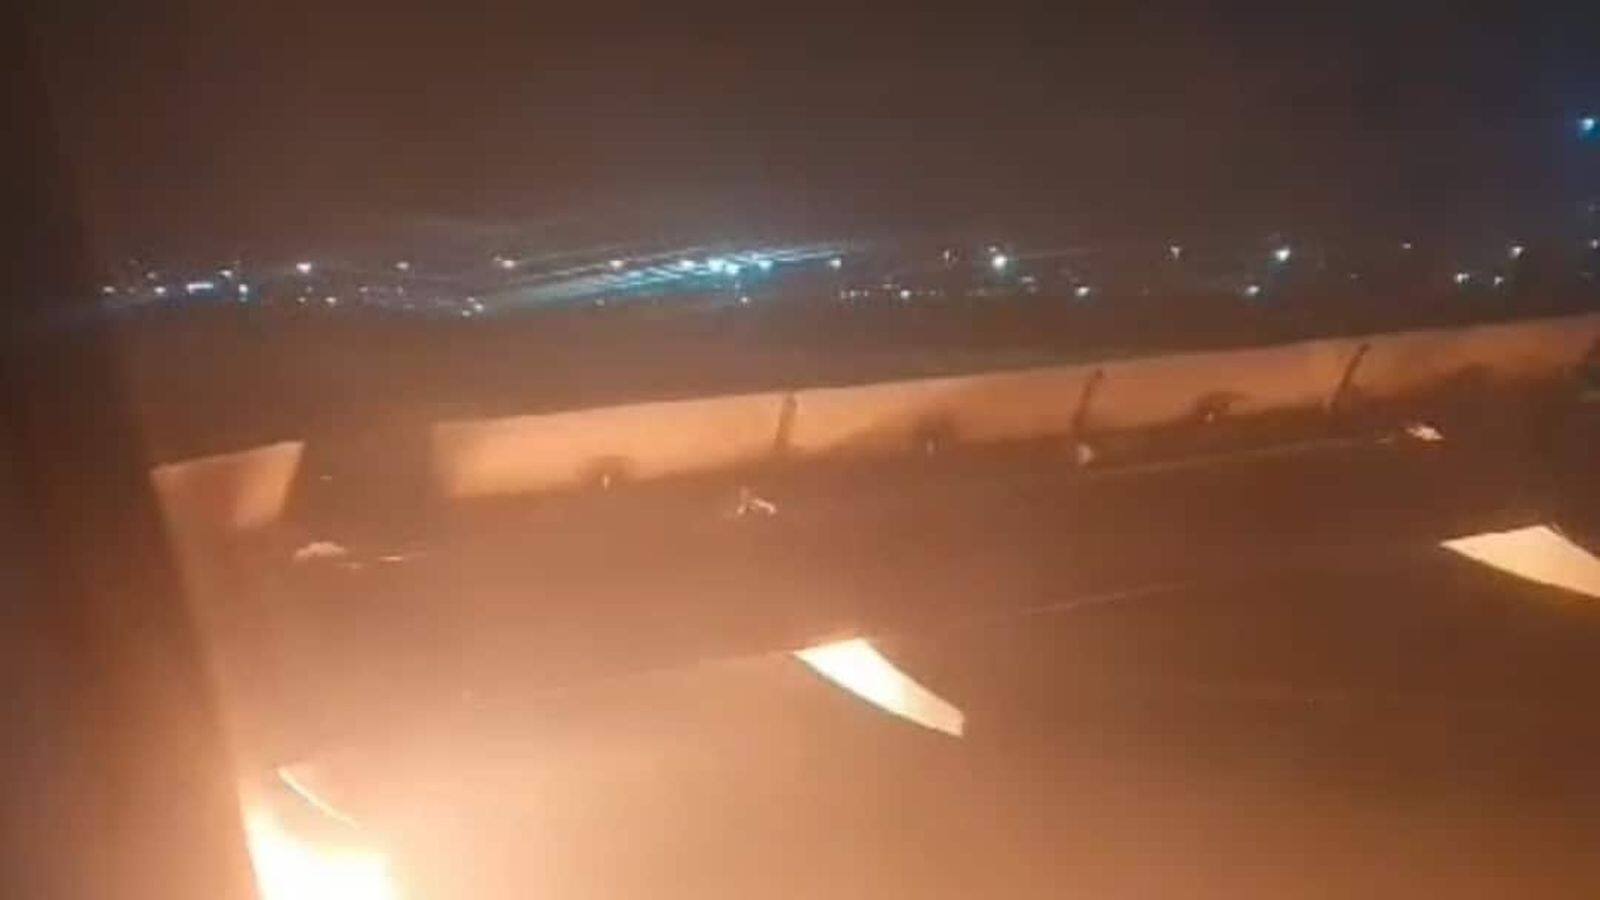 AI Express flight makes emergency landing after engine catches fire